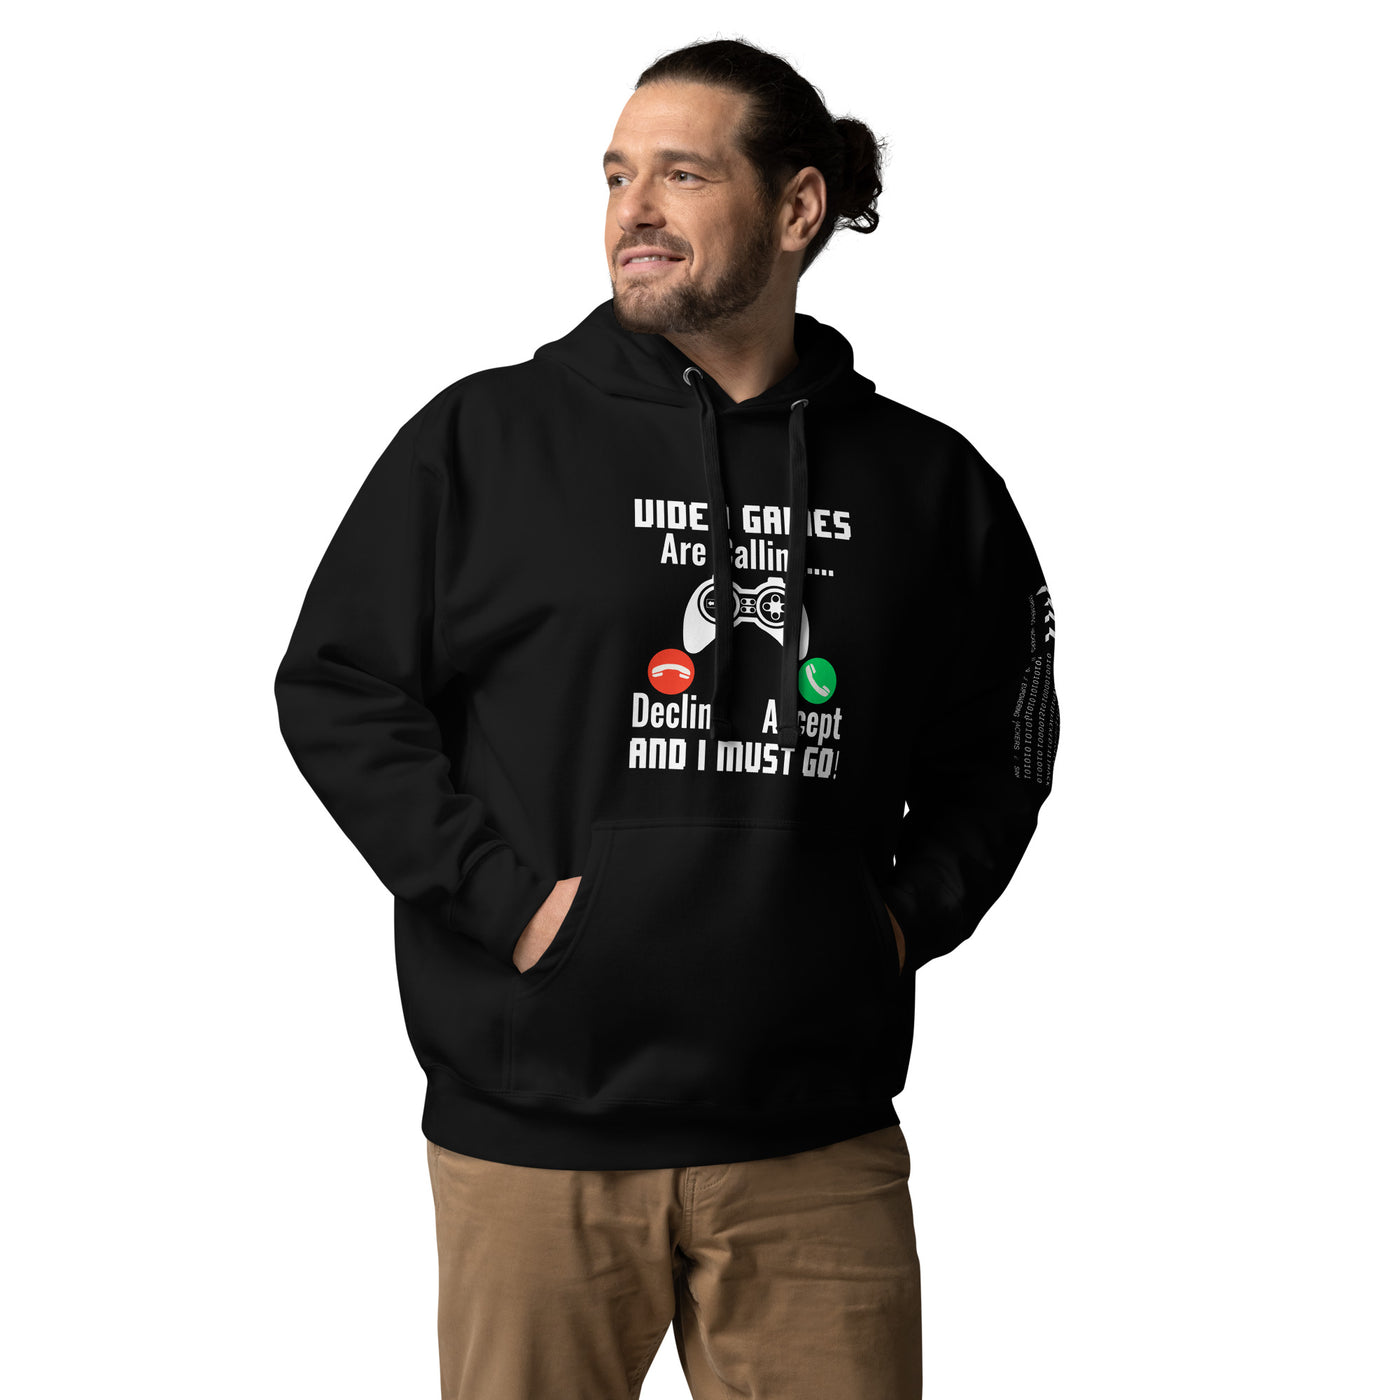 Video Games are Calling and I must Go Rima 18 - Unisex Hoodie